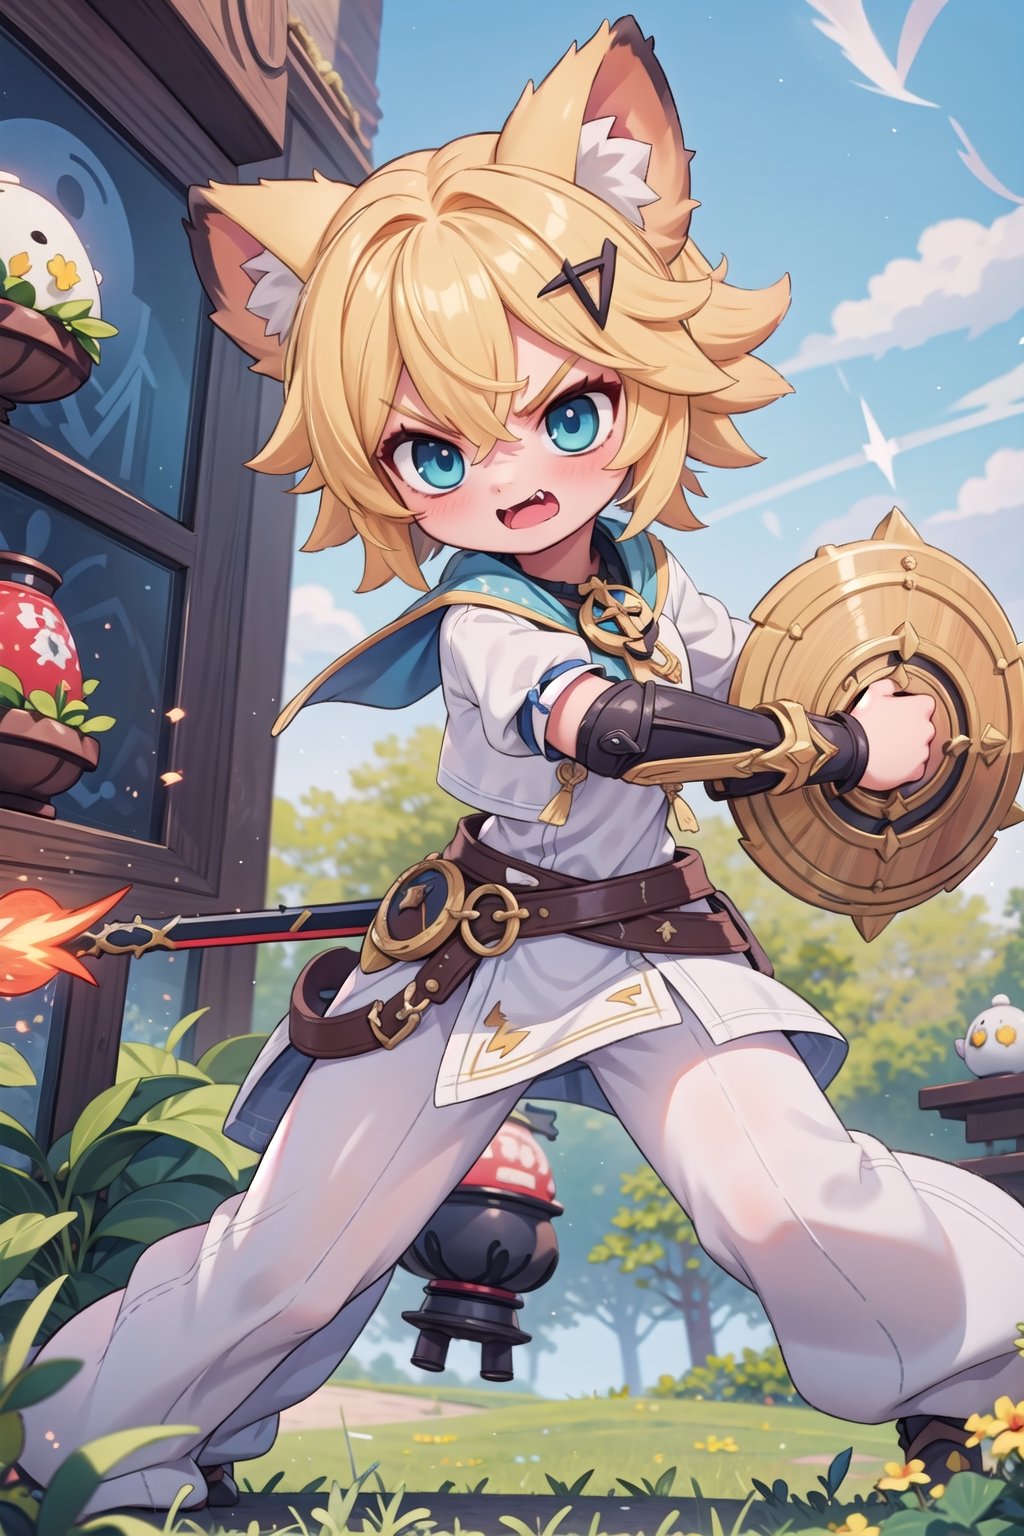 (masterpiece), (science fiction:1.4), light particles, 1girl, medium hair, sidelocks, blue eyes, yellow hair, brown animal ears, hairpin, action pose, fighting stance, attack stance, fangs, holding a shield, holding a yellow lightning sword, mouth open, eyebrows angry, joyml